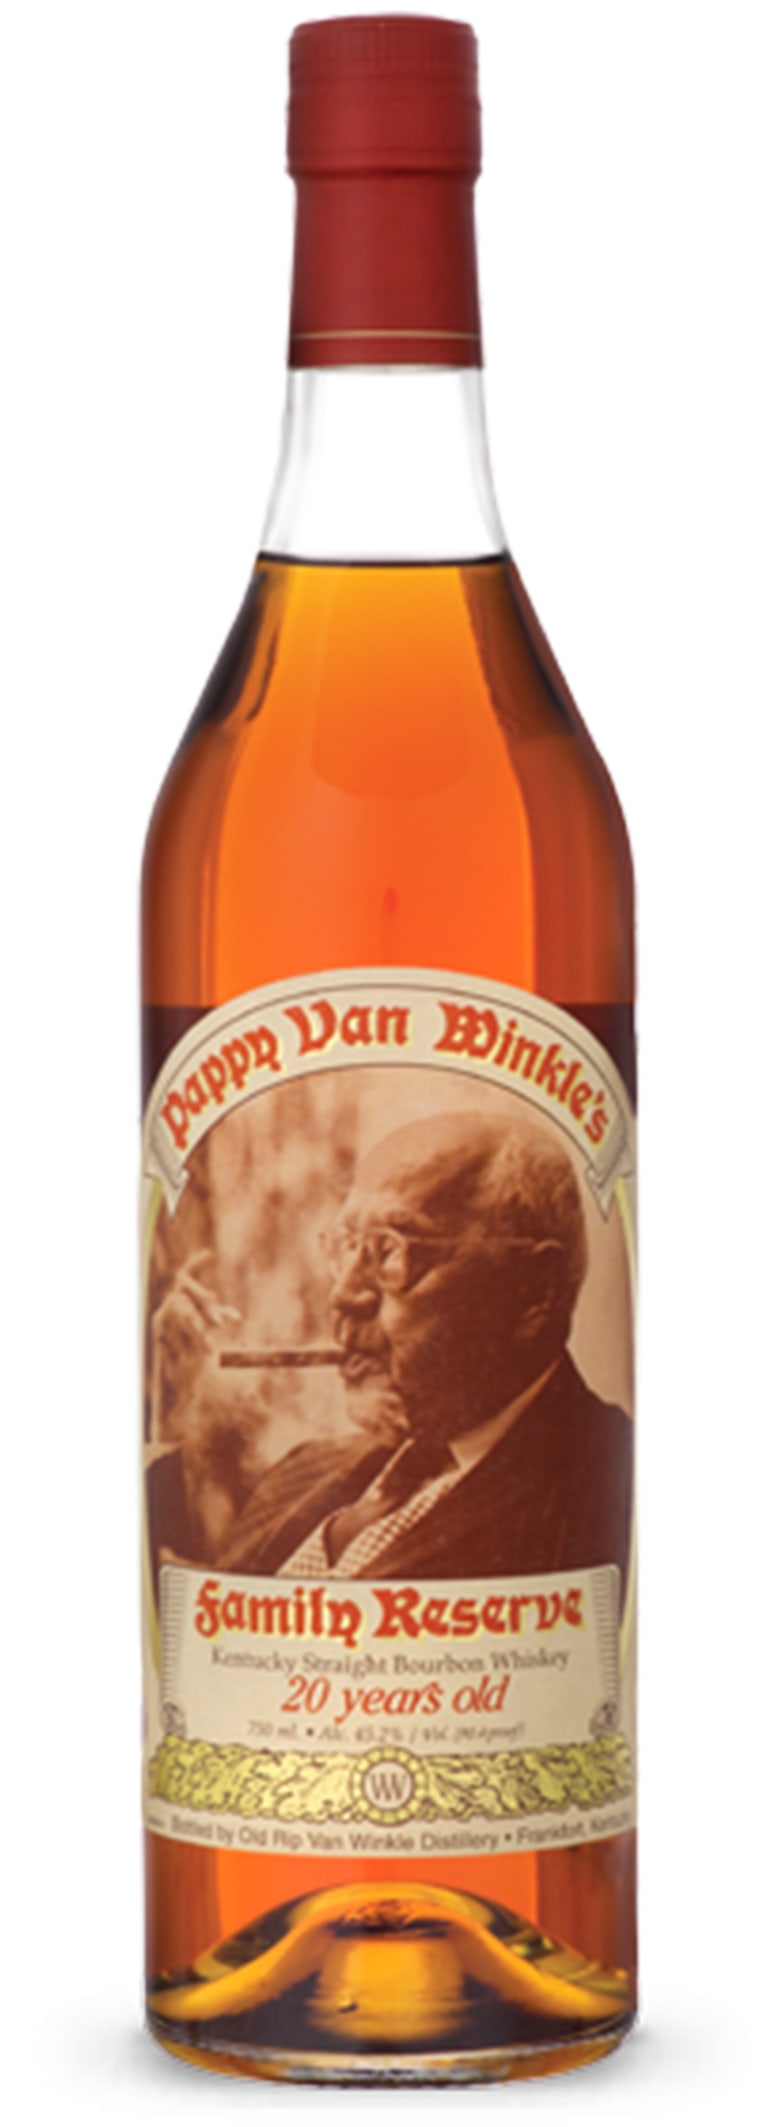 Pappy Van Winkle 20-Year Reserve Bourbon retails at $200 a bottle — and older bottles can sell for twice that.